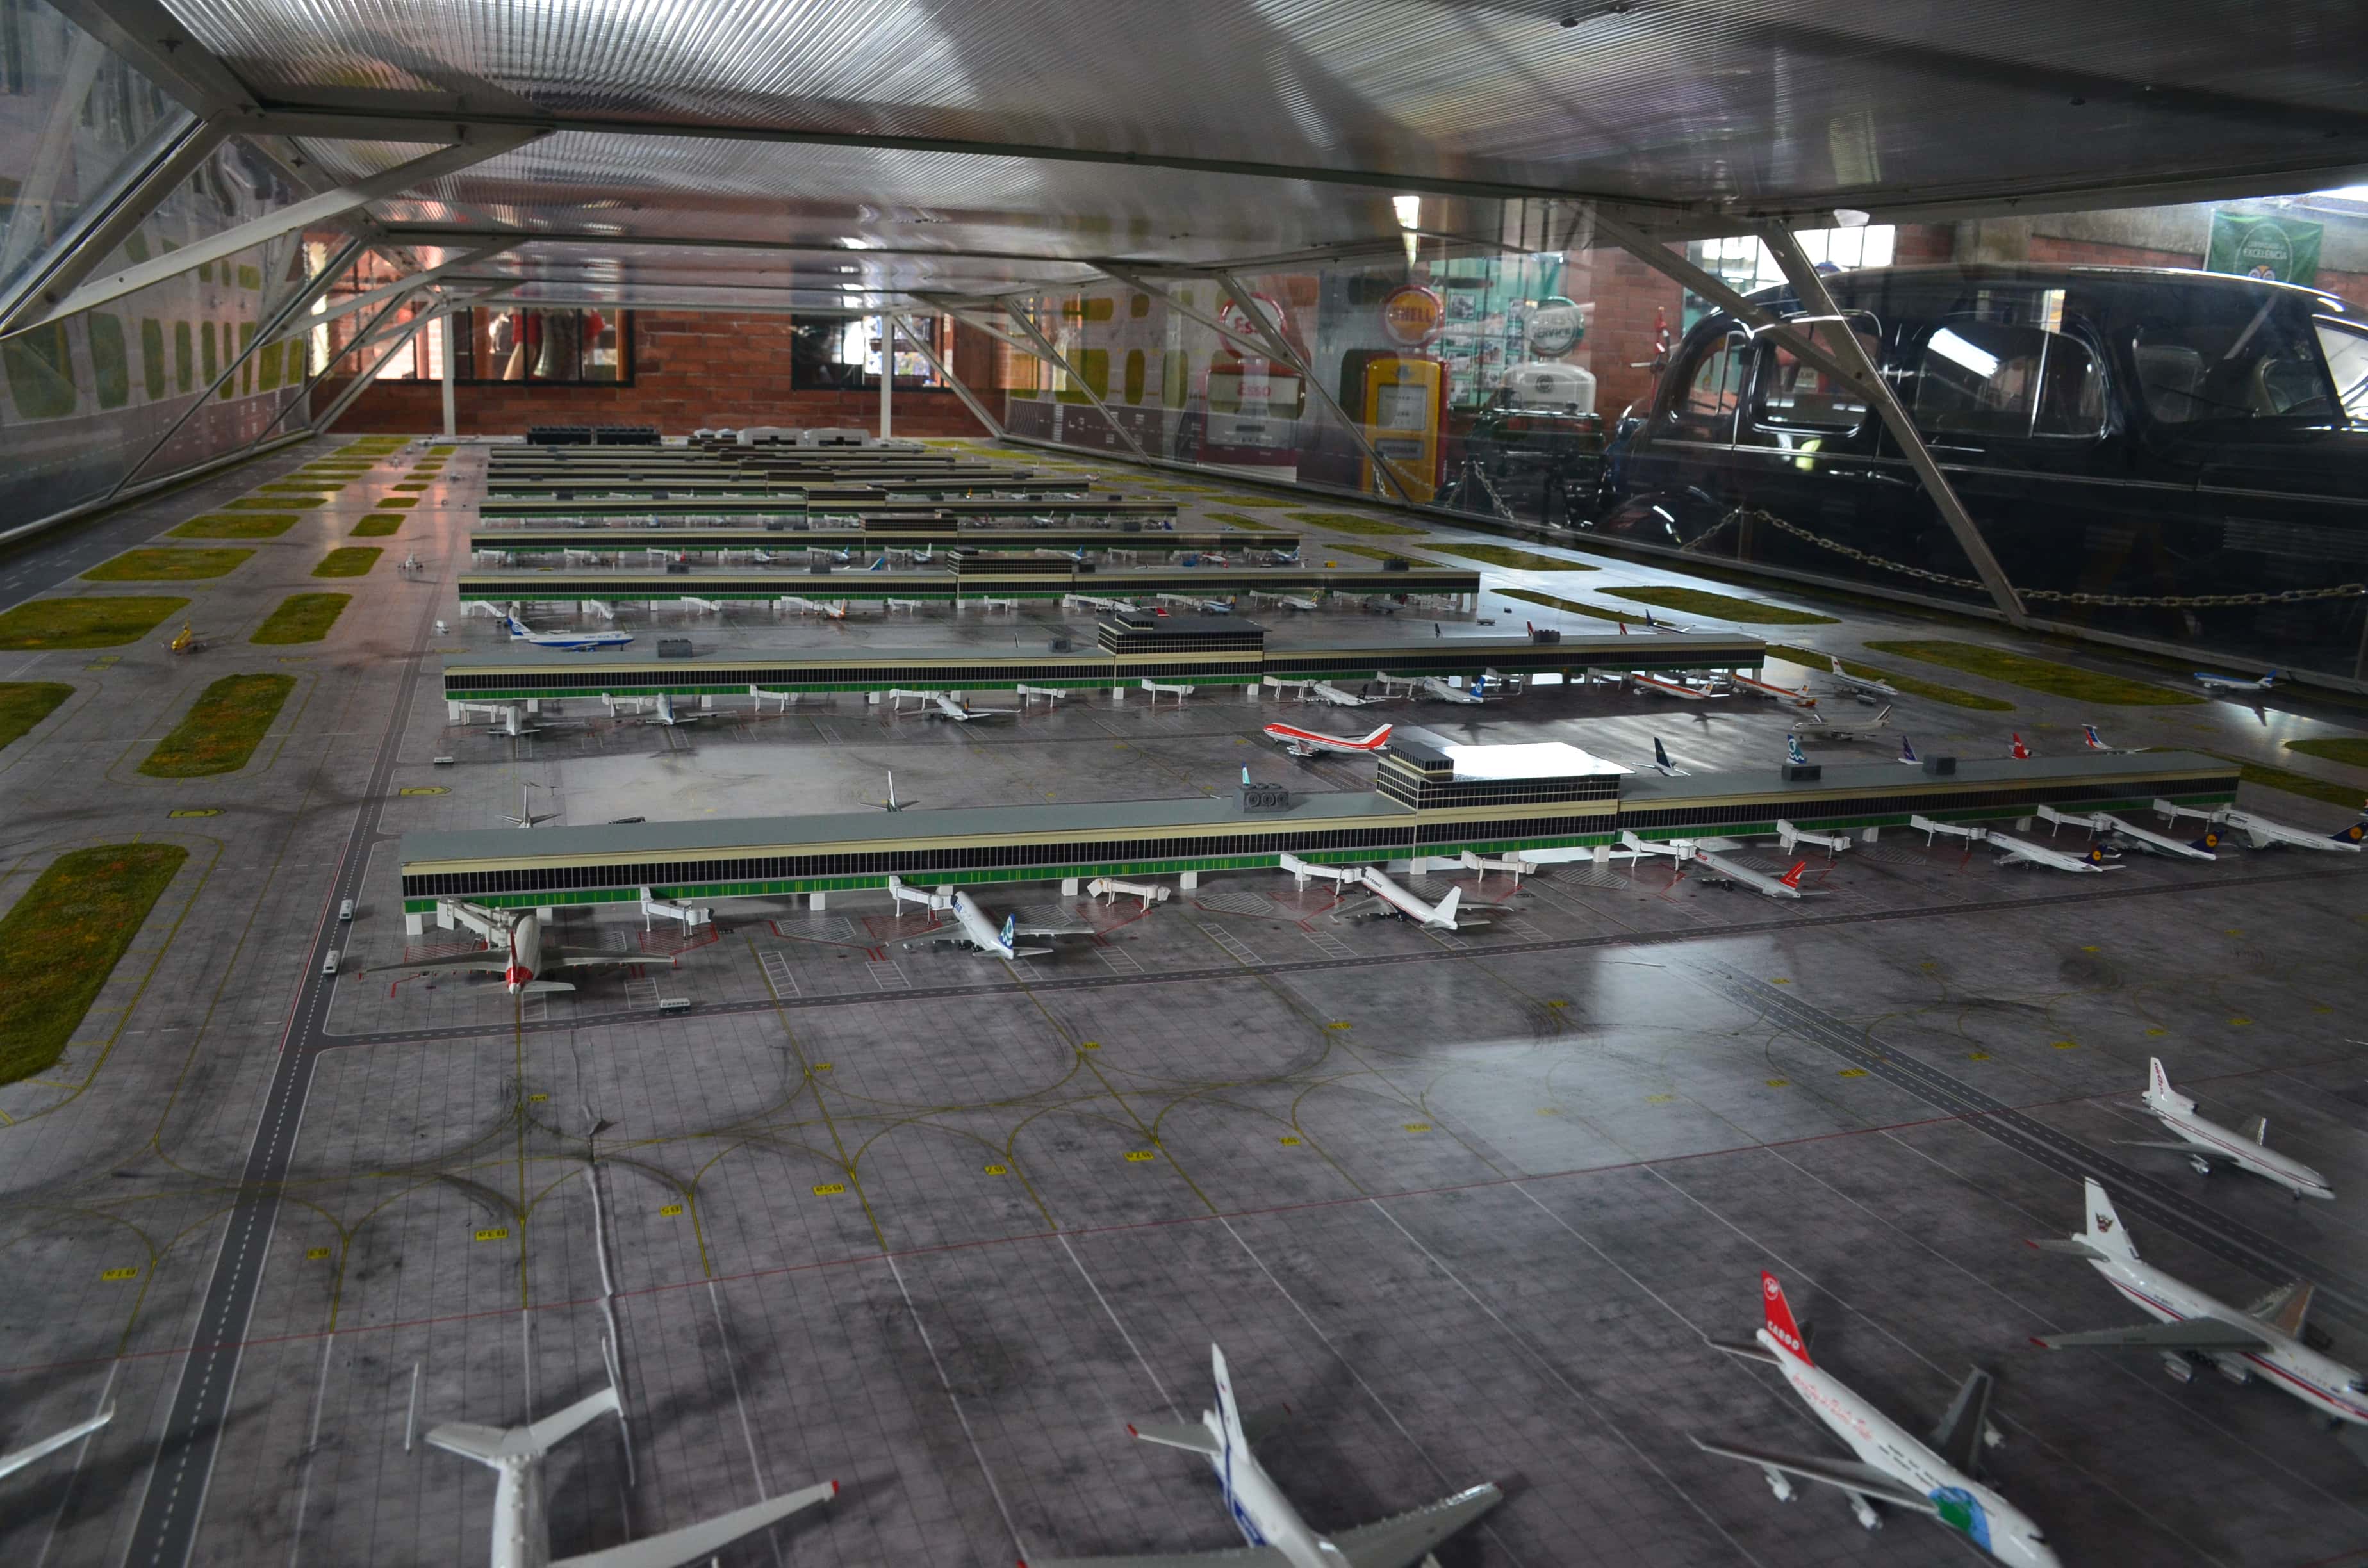 Model planes at Fénix Air Museum in Palmira, Valle del Cauca, Colombia